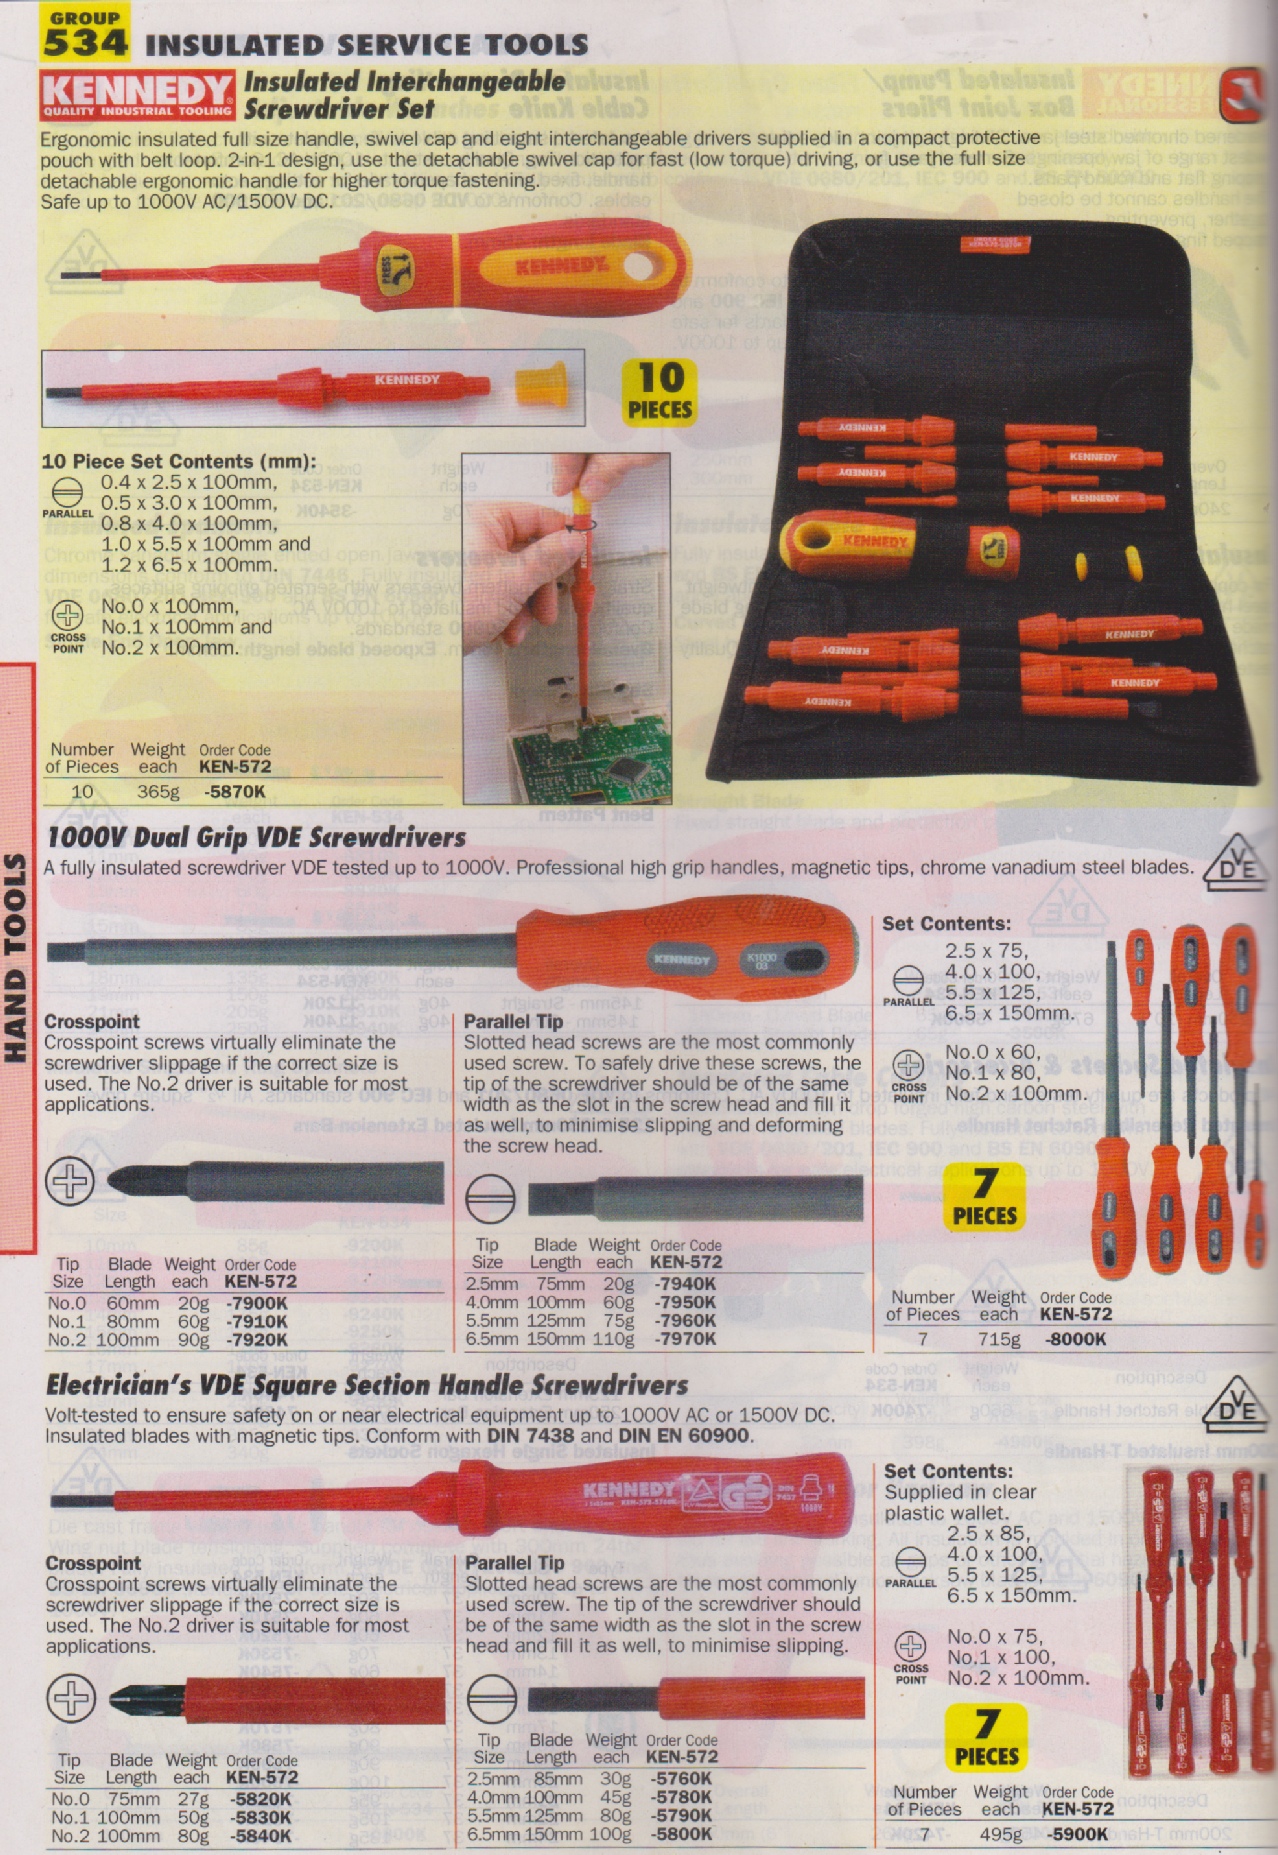 insulated service tools, chennai,insulated screw driver set,dual grip vde screw drivers,electrician vde section handle screwdrivers